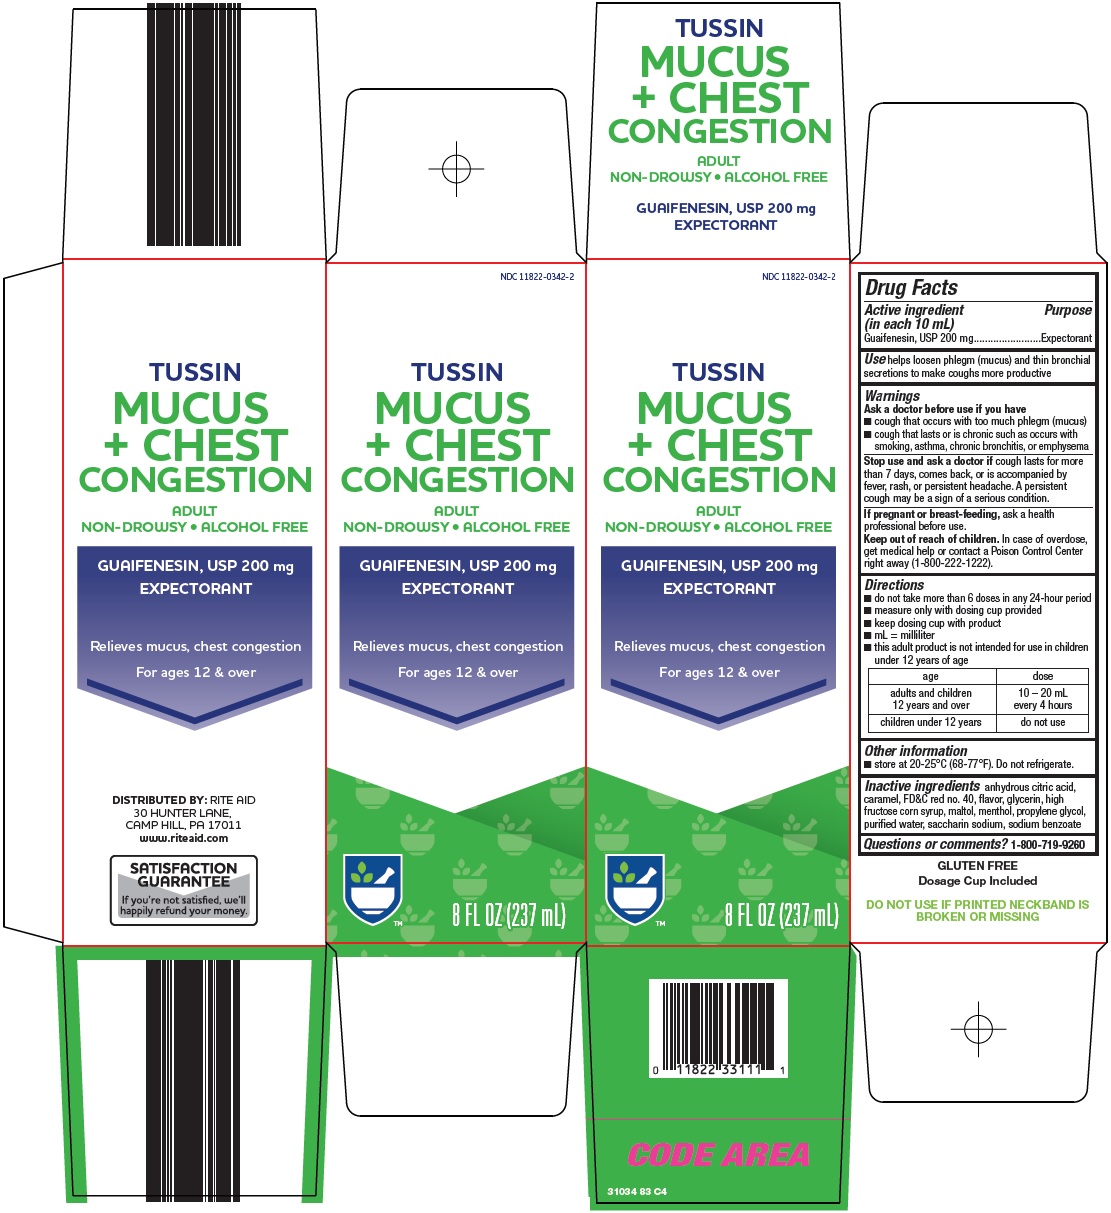 Tussin Mucus + Chest Congestion Carton